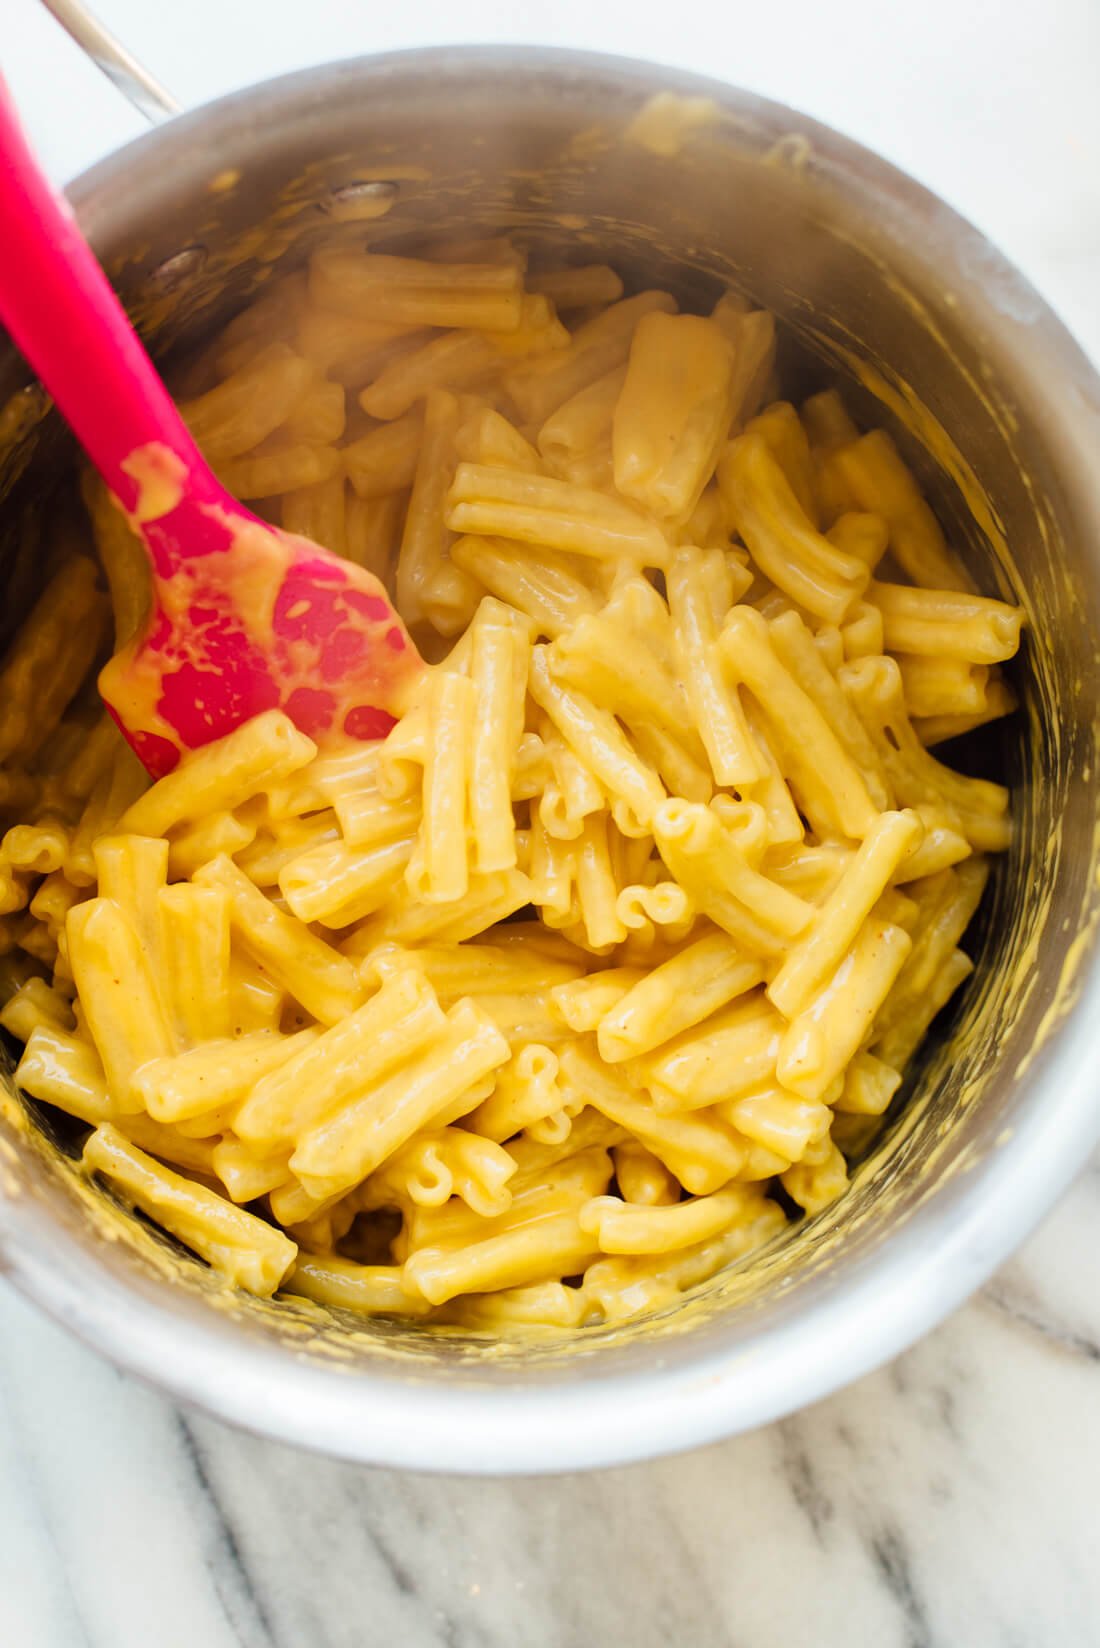 How To Make Cheese For Mac And Cheese